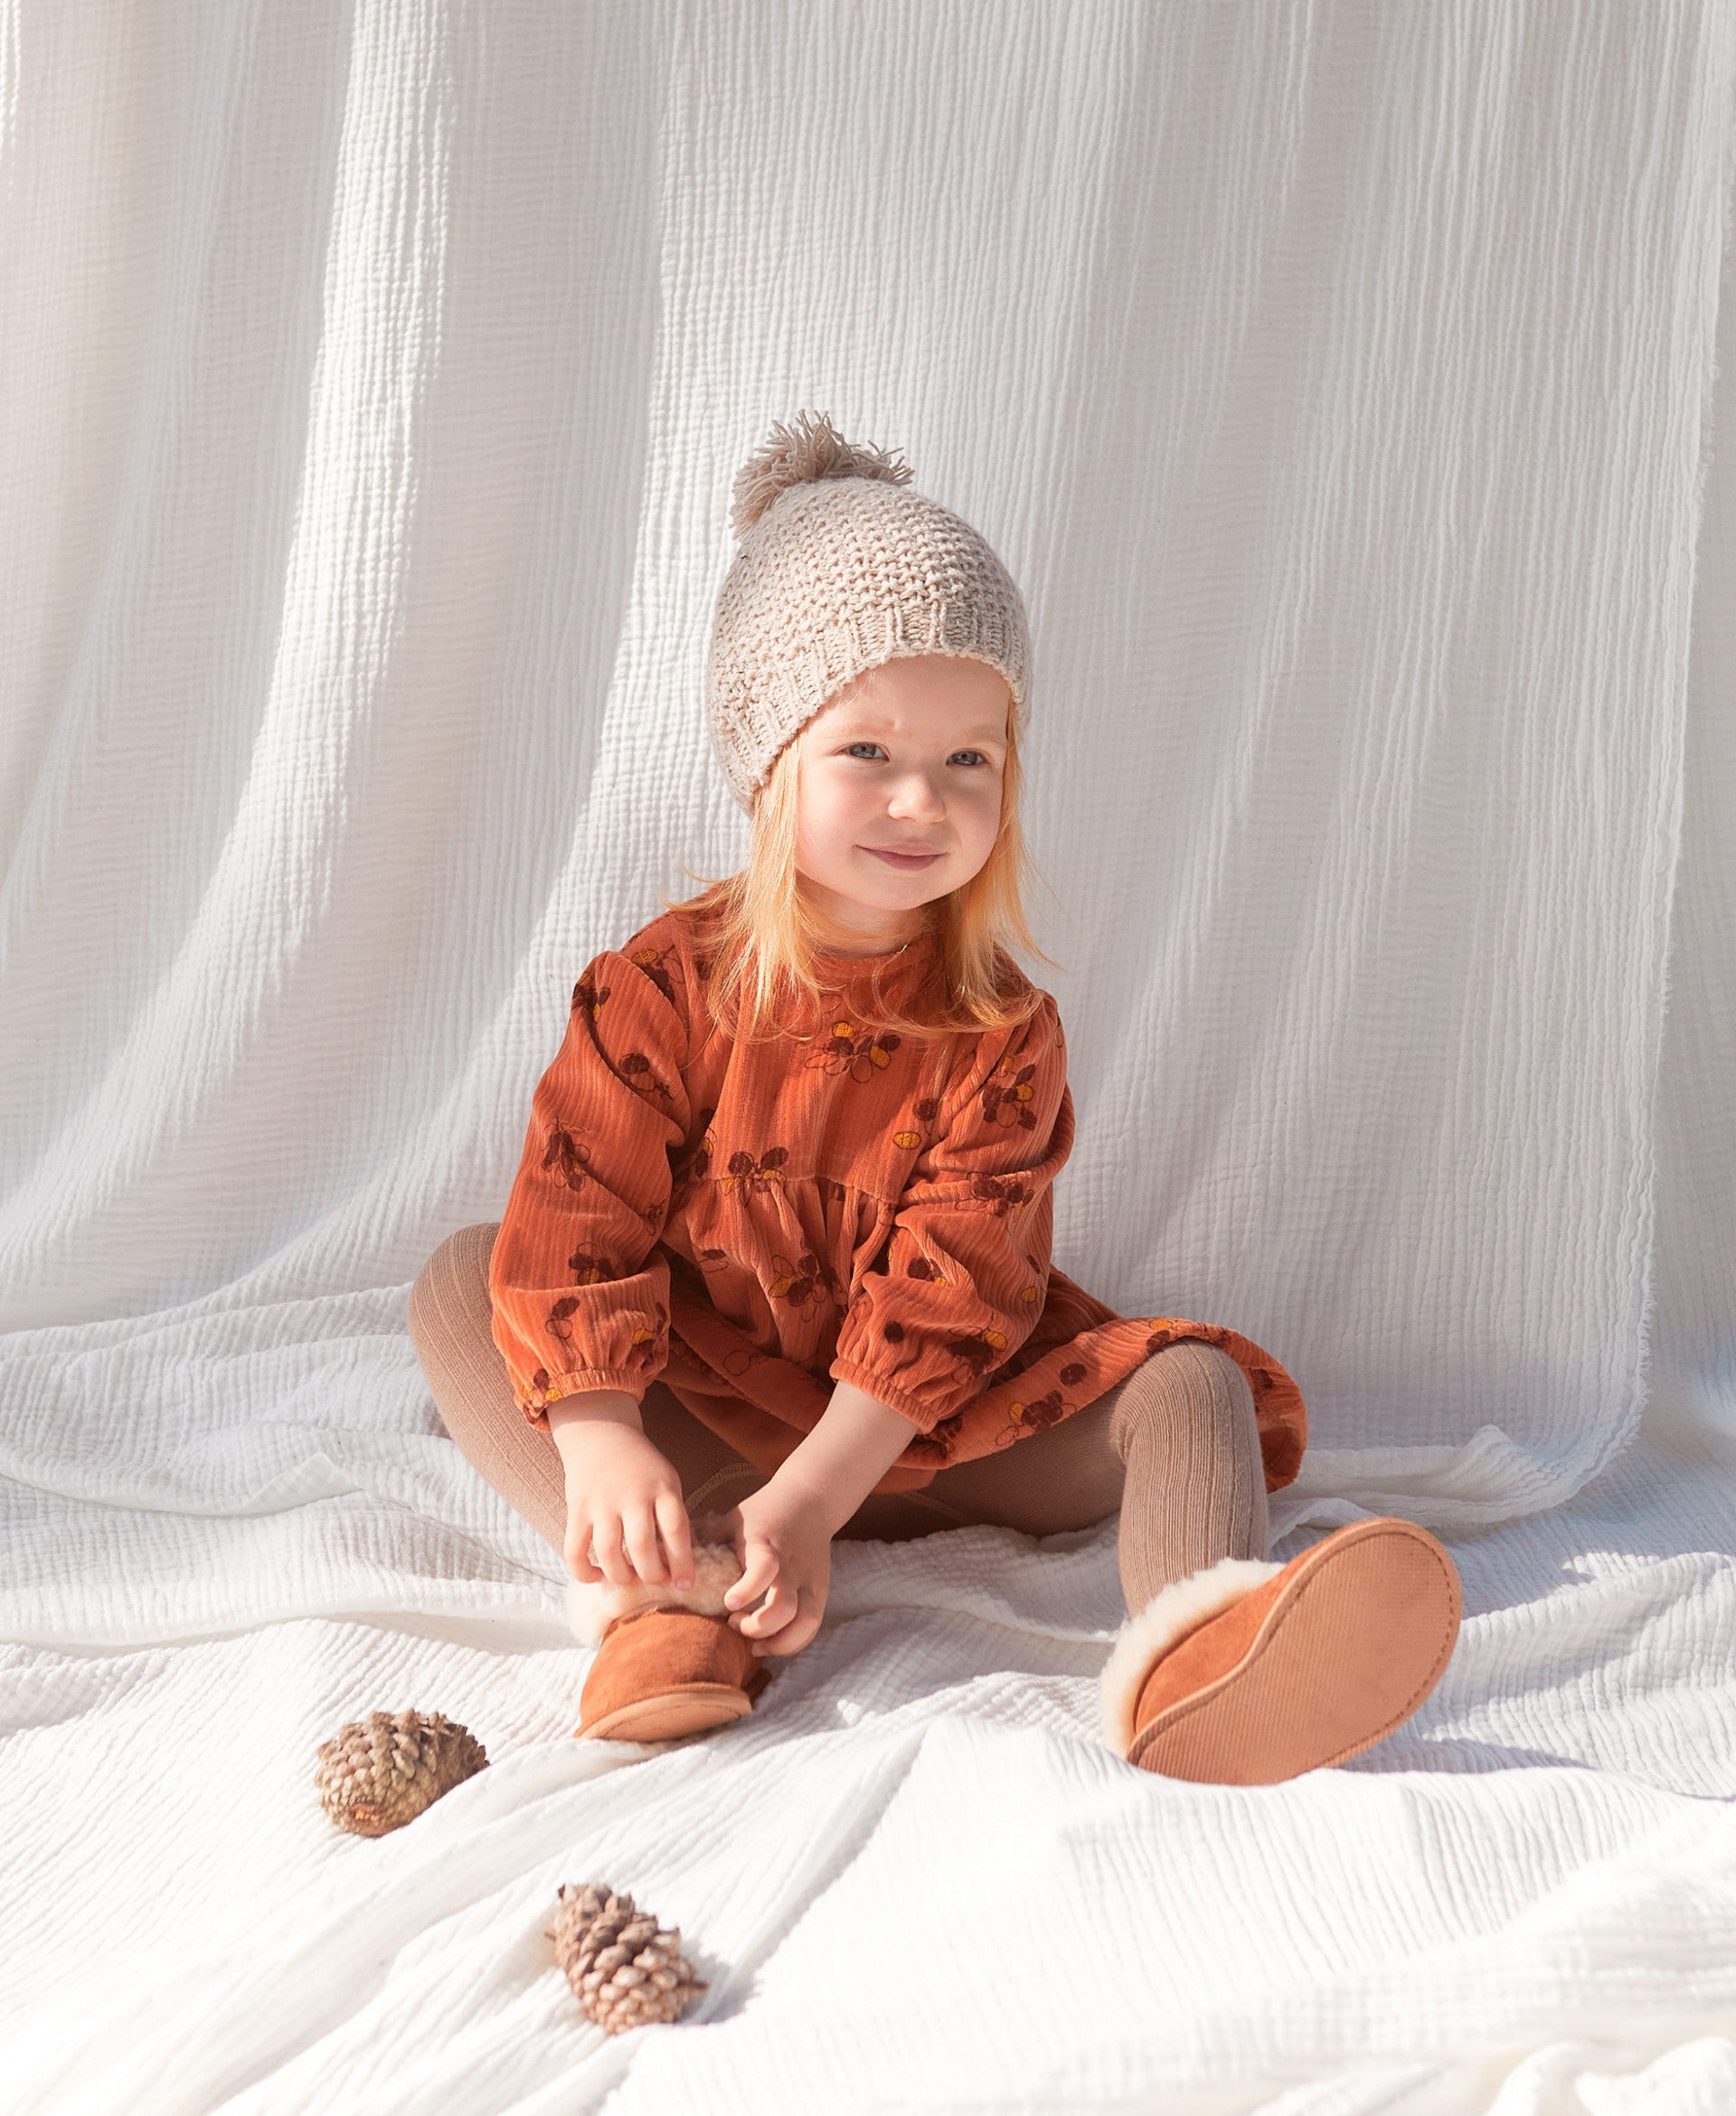 Knitted beanie with pompom on top